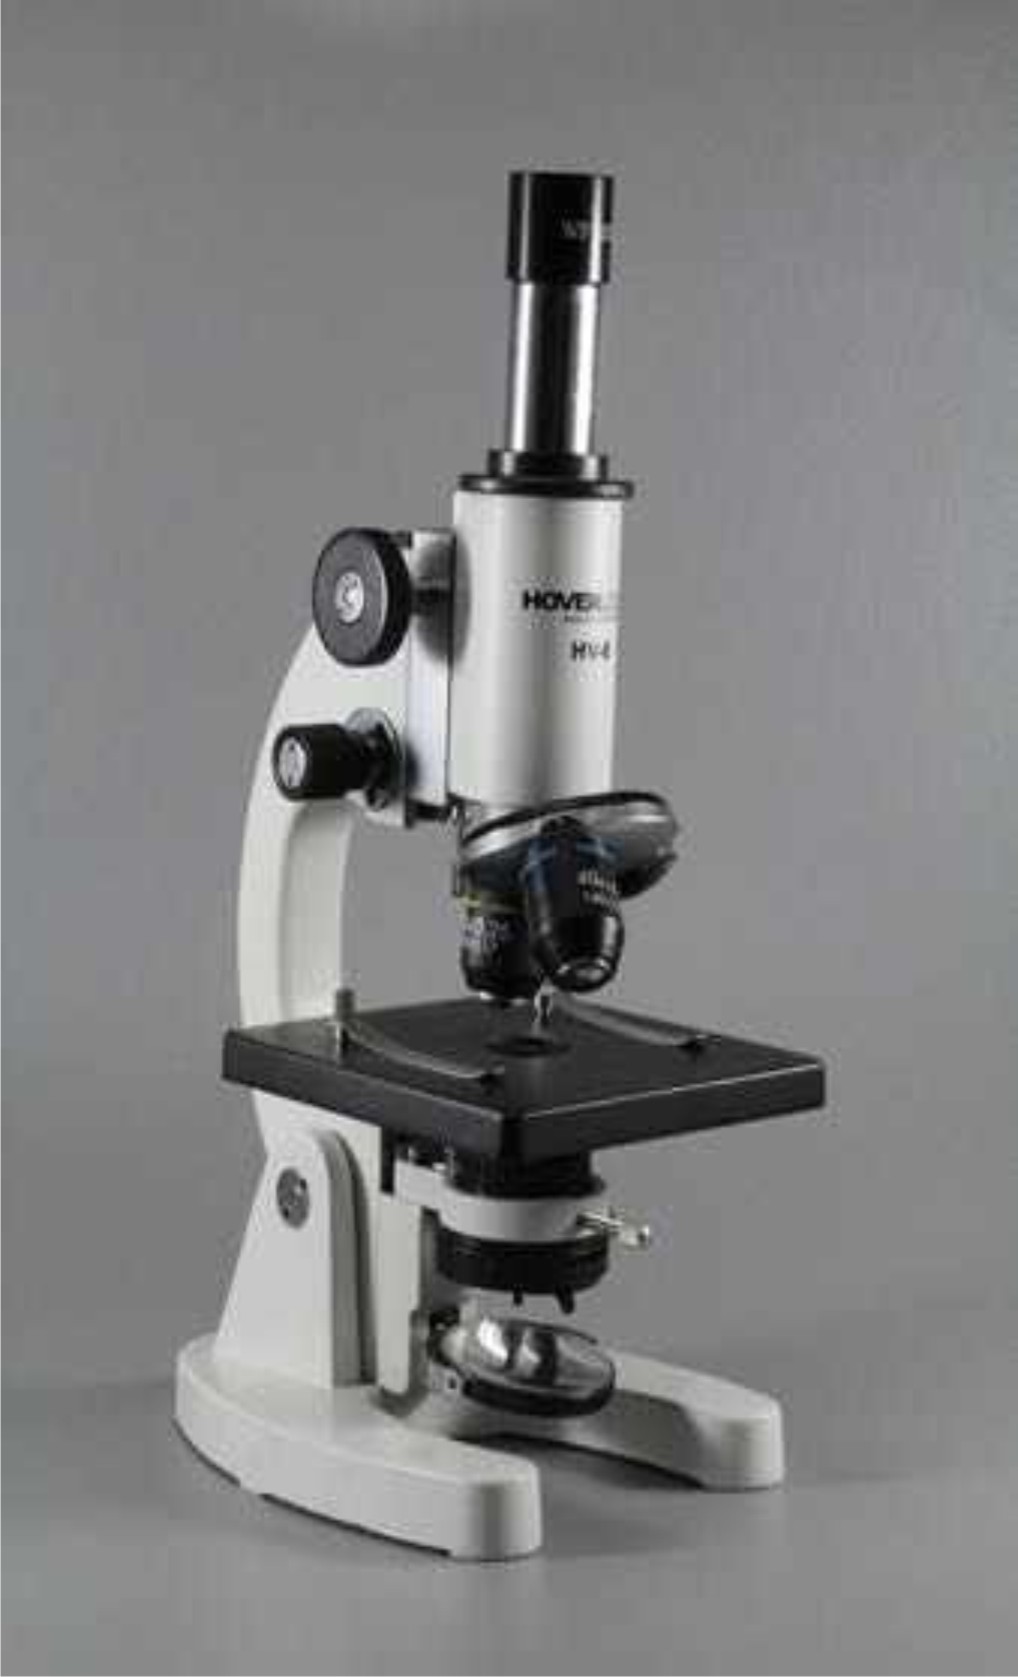 controller/assets/products_upload/Student Microscope With Movable Condenser, Model No.: KI - 2240 - MC